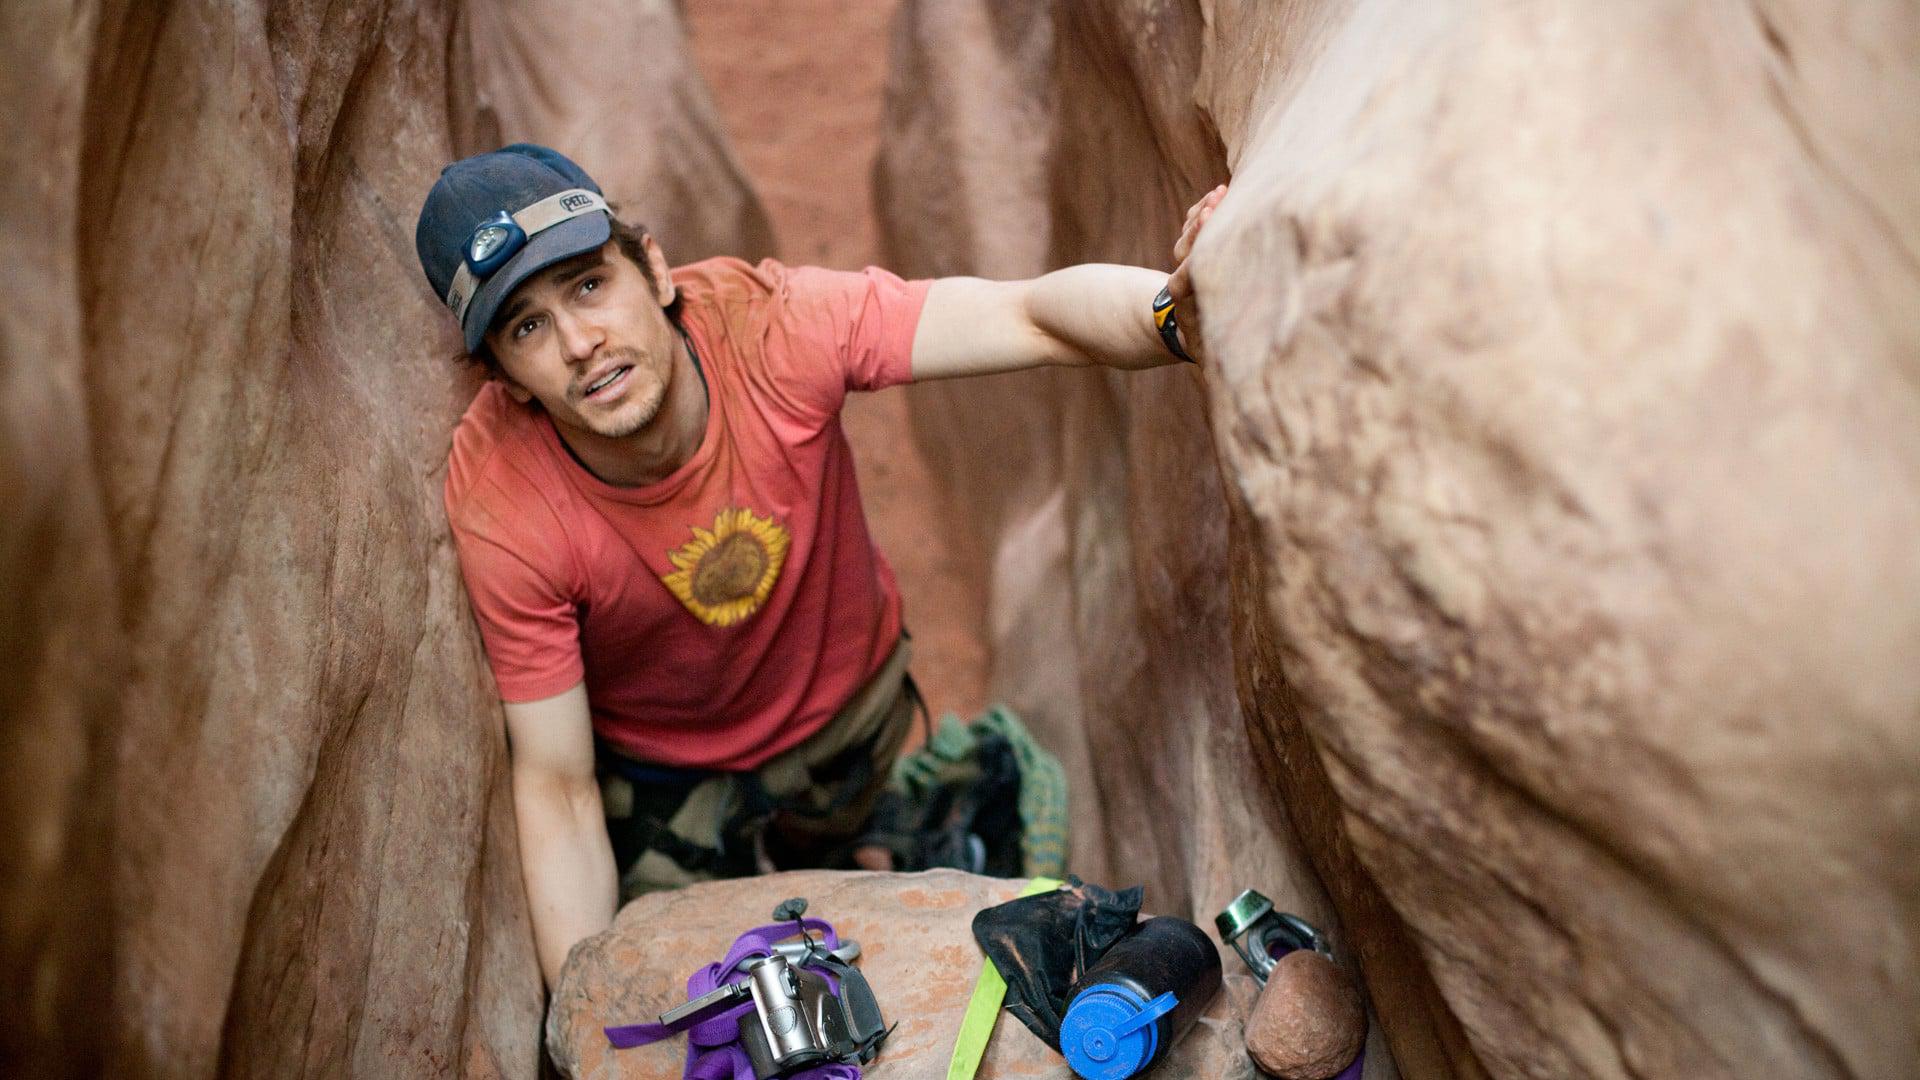 Backdrop Image for 127 Hours